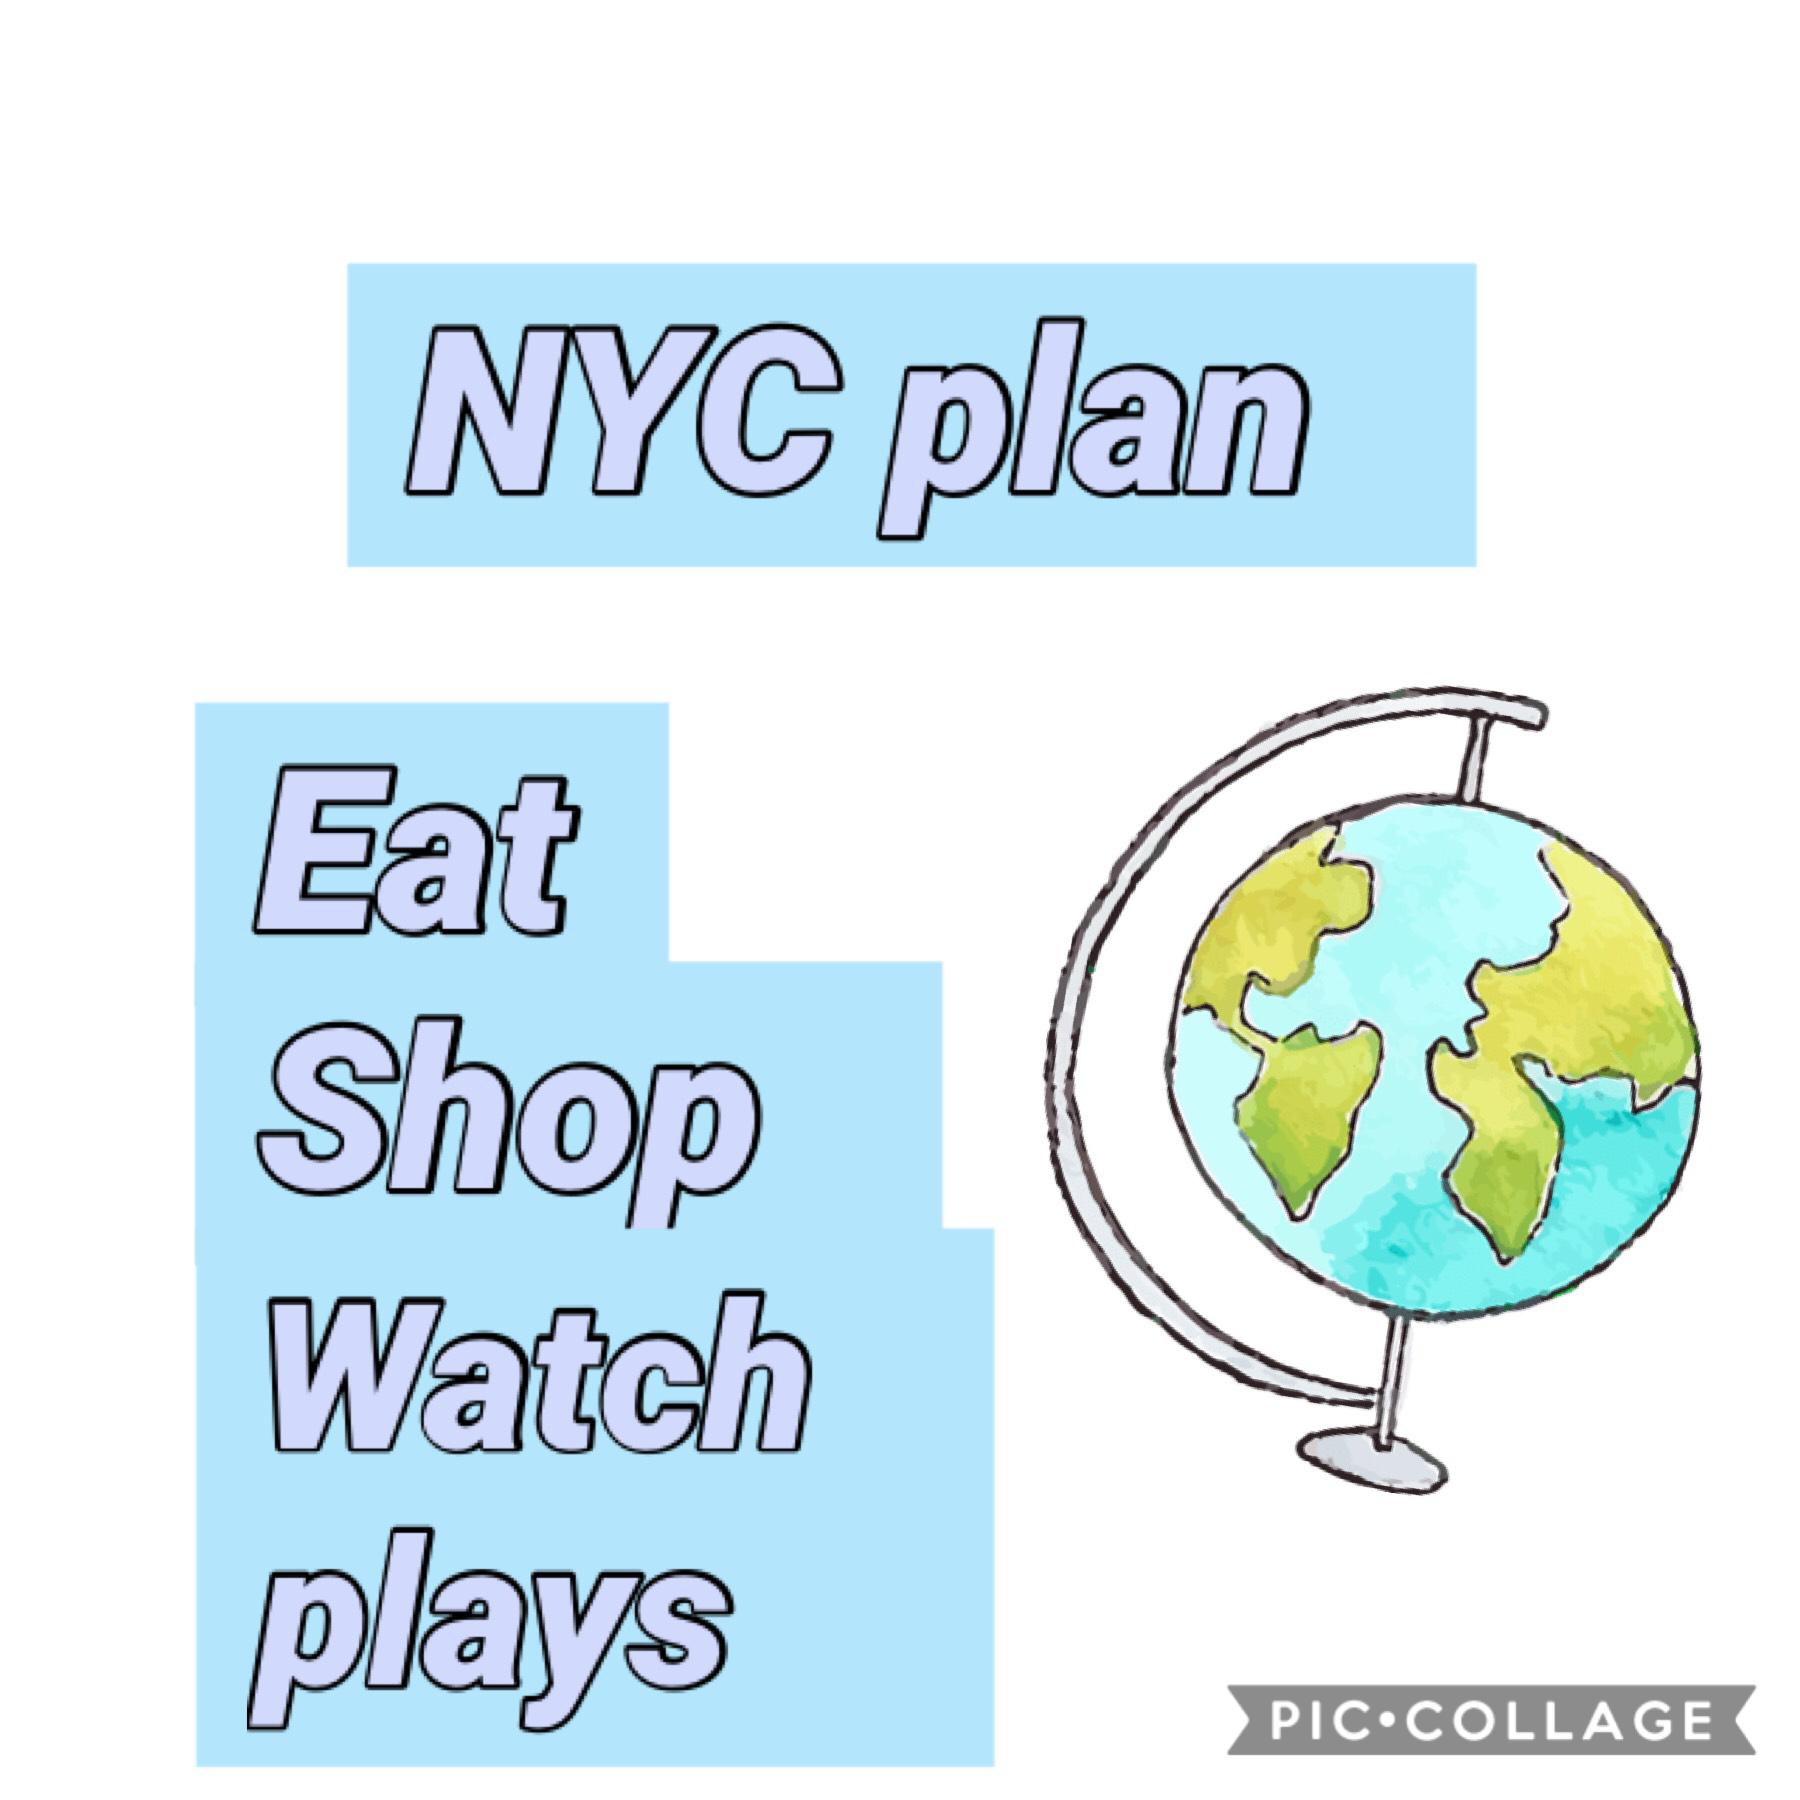 Guys I’m in NYC! I came up with this last night. Tell me what you think about it! Comments with the best explanation we’ll get a shout out in the next post! 

YouTube: Coco Muniz
